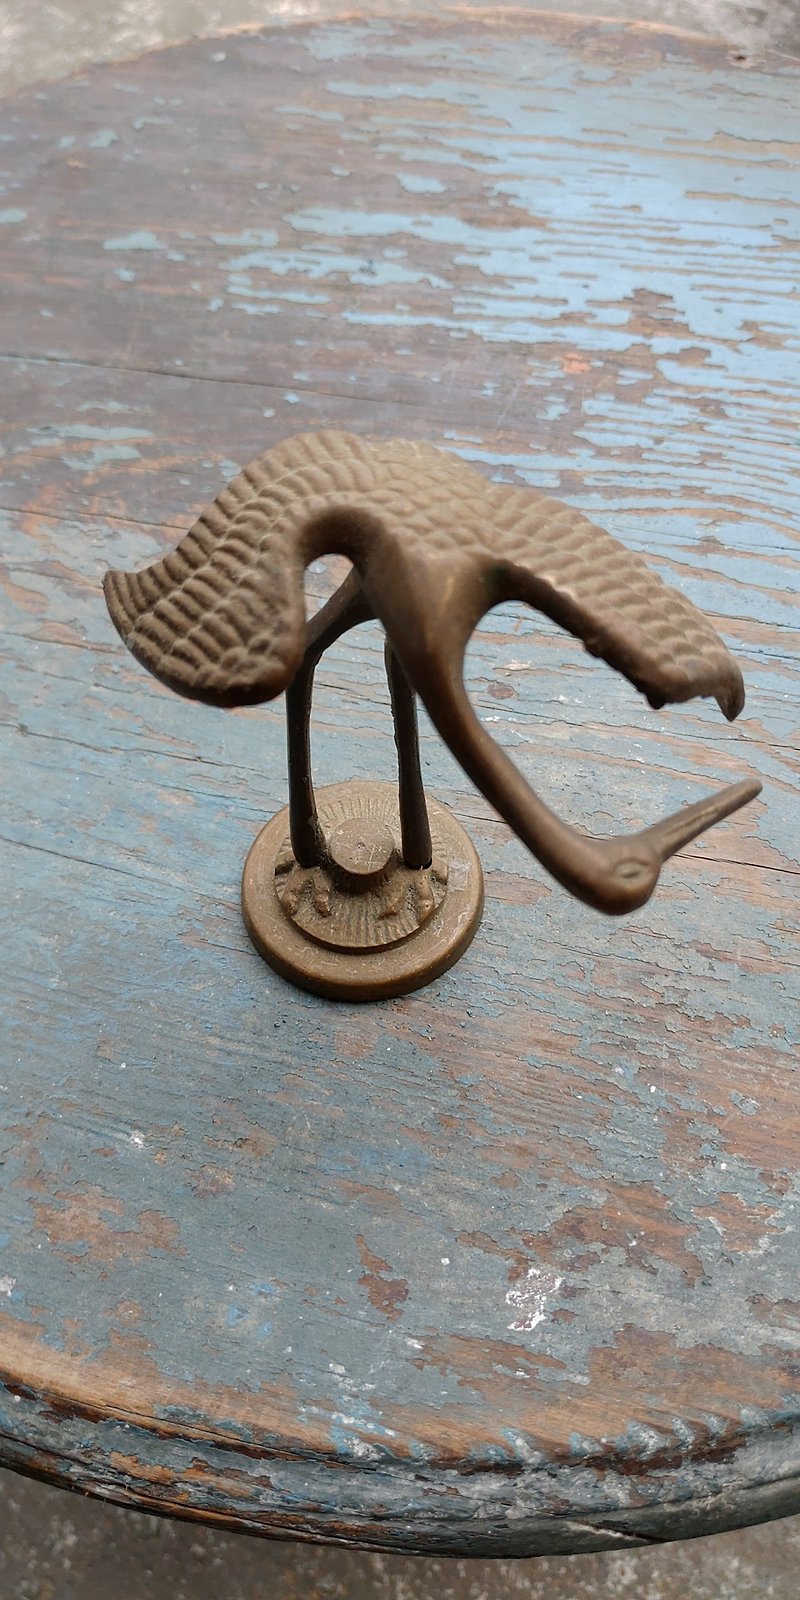 Early collection of industrial wind _ Huang Bronze crane paperweight decorations - ตุ๊กตา - โลหะ 